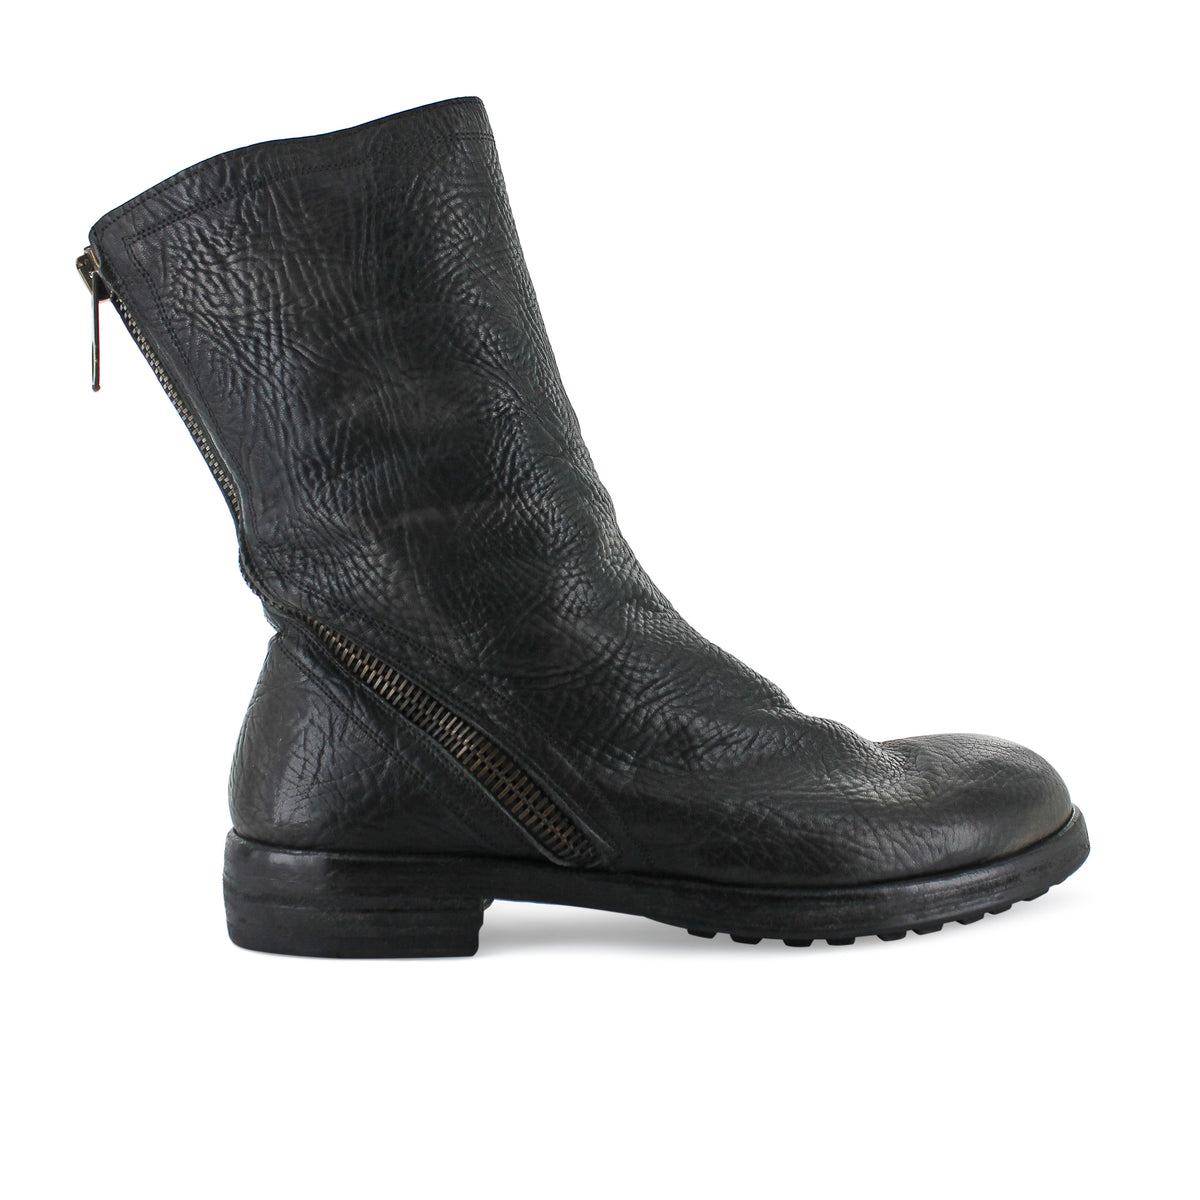 Maurizi - Grained Leather High Boot